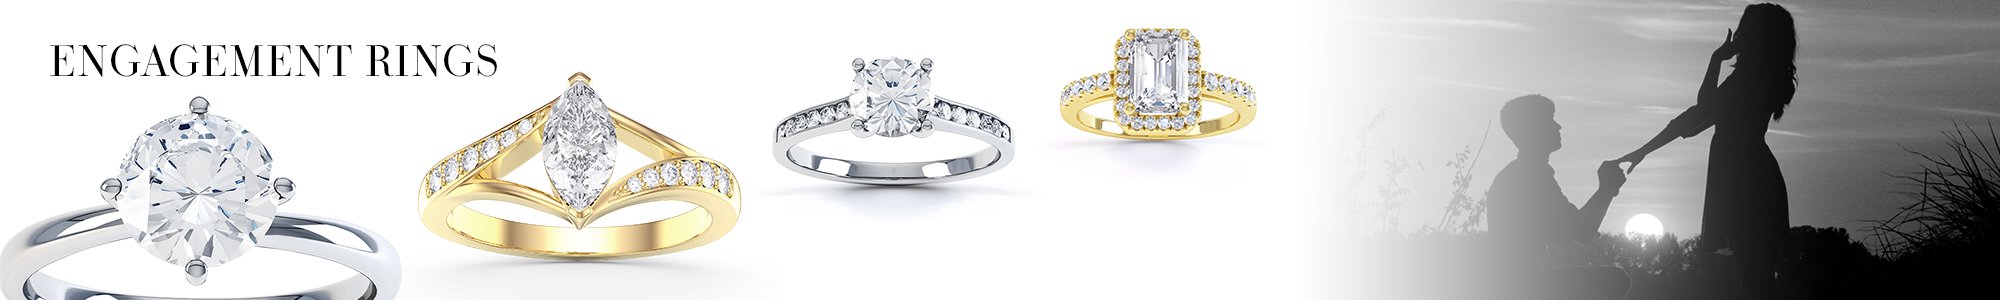 Engagement Rings - From White Sapphire set in Silver to Diamonds set in 18K Gold or Platinum.